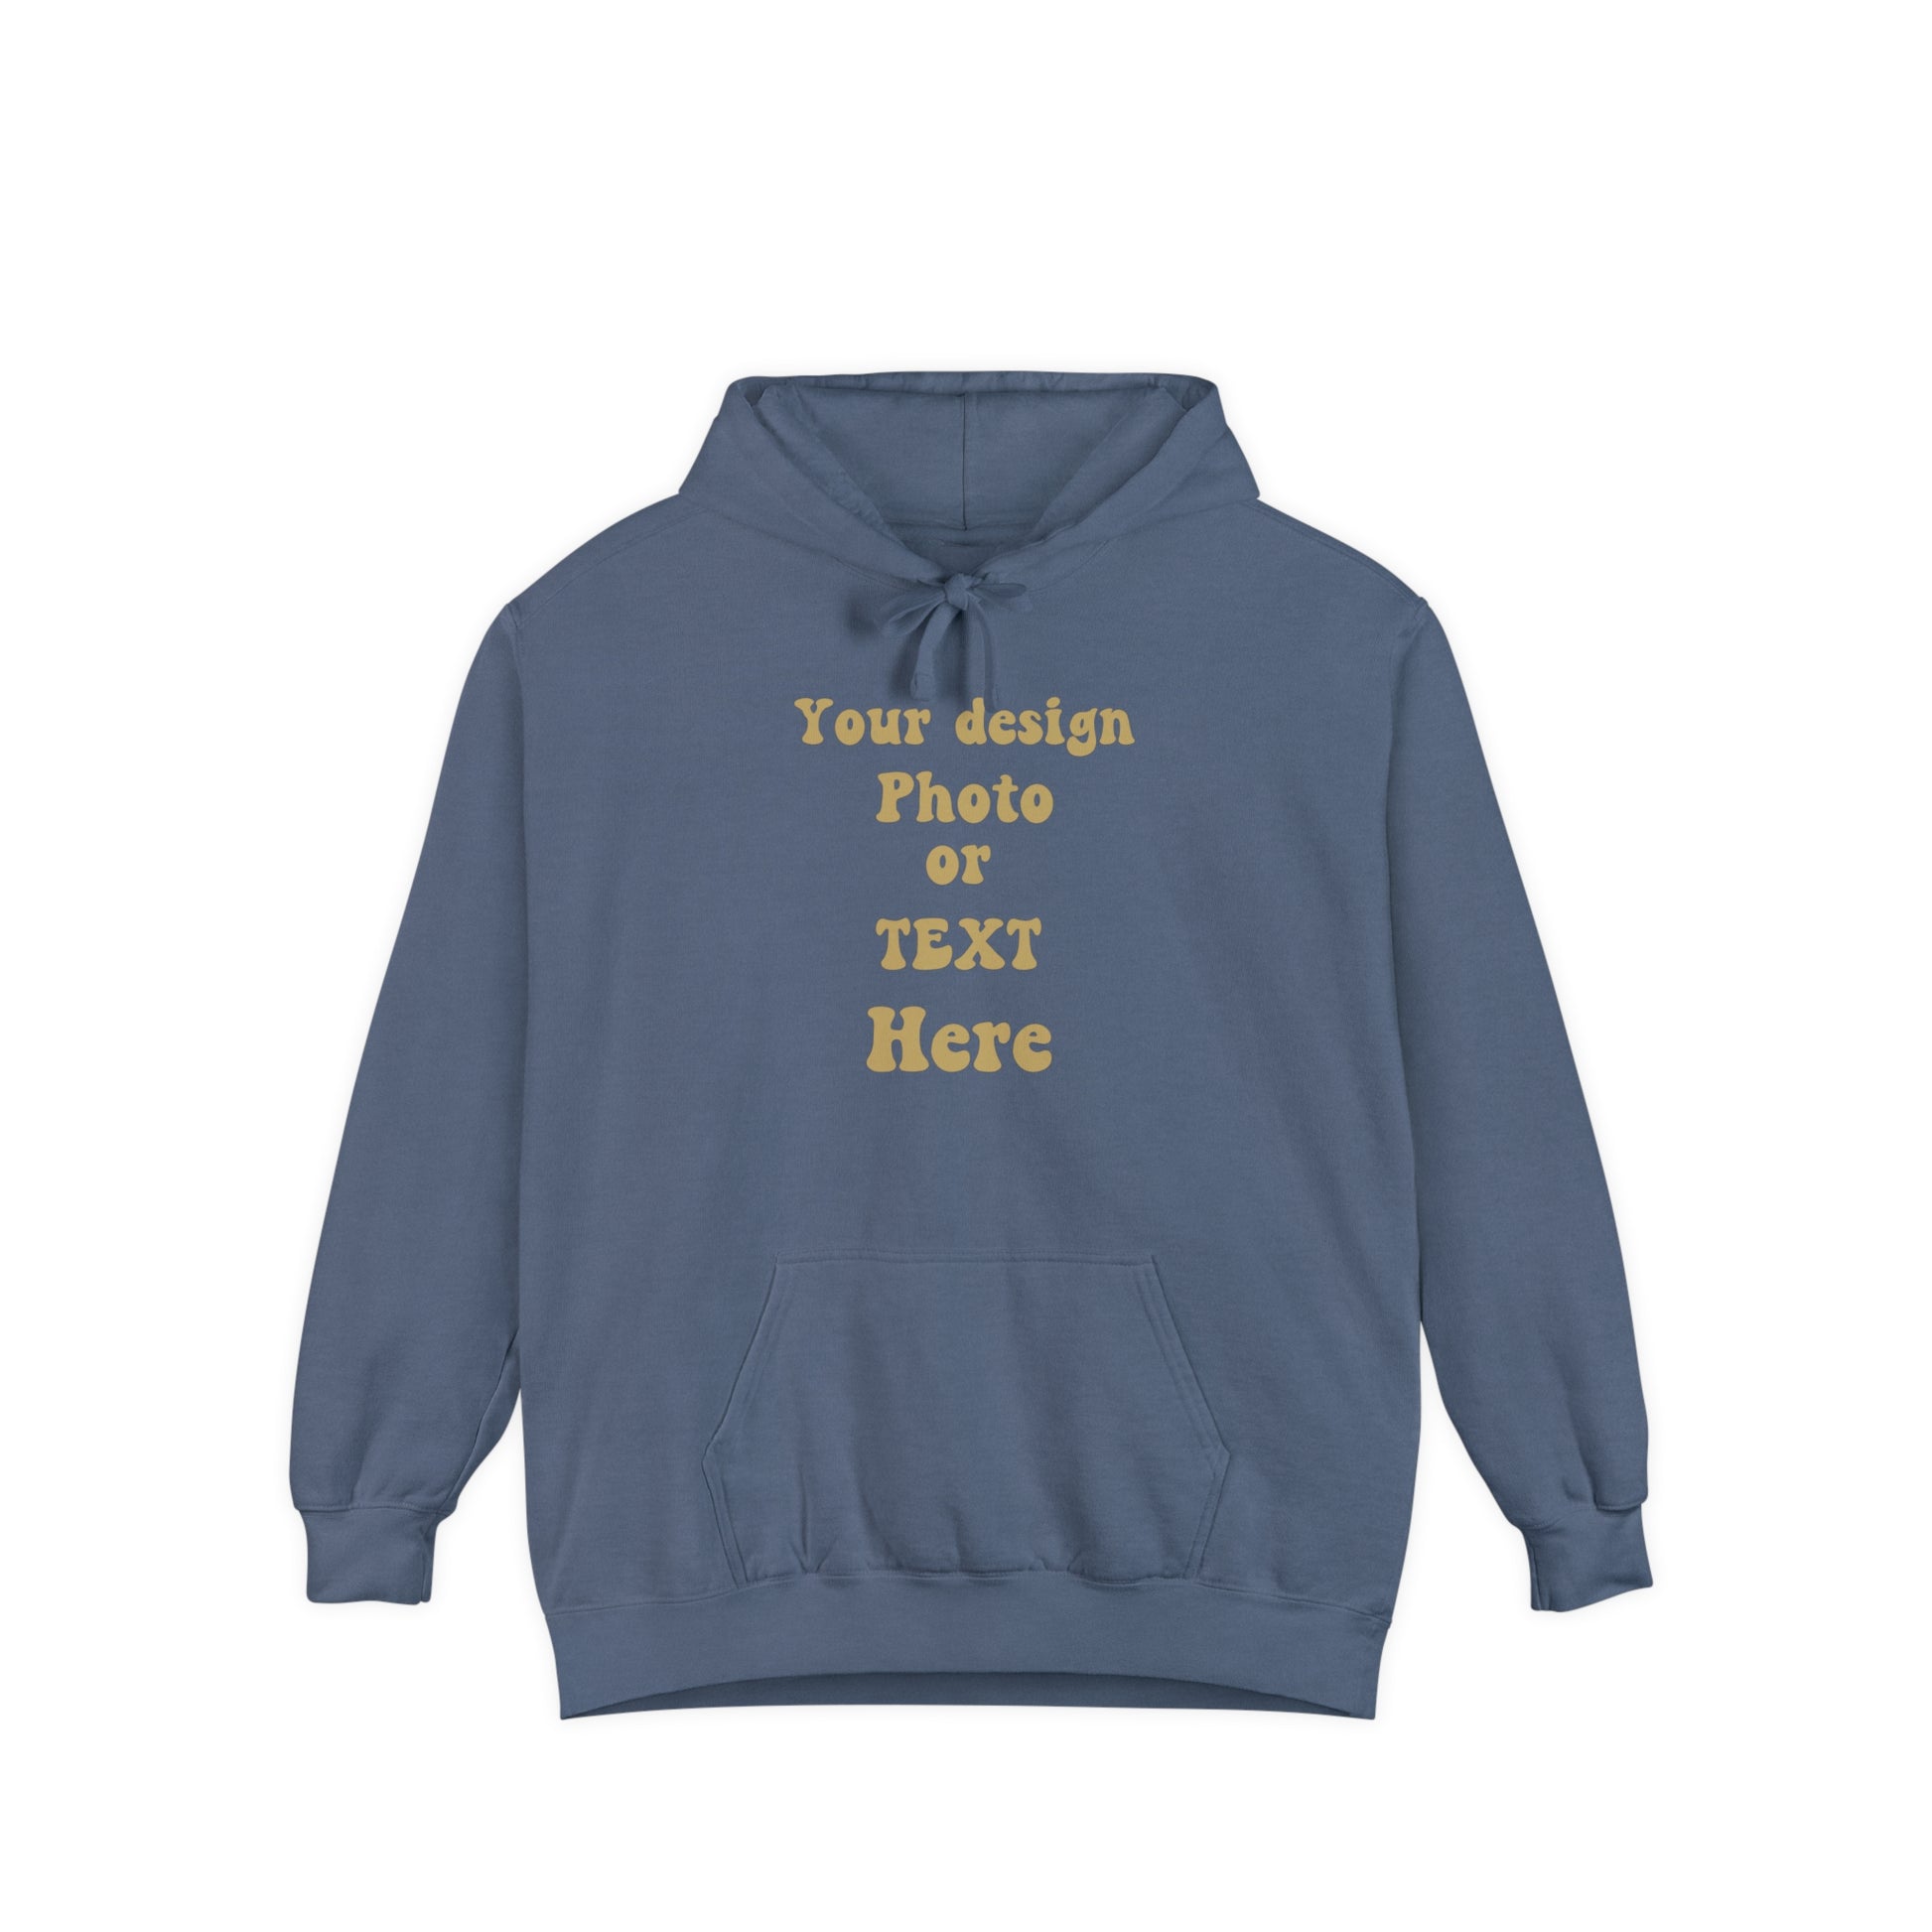 Luxury Hoodie - Personalize with Your Design, Photo, or Text | Greatest Comfort Hoodie Denim S 